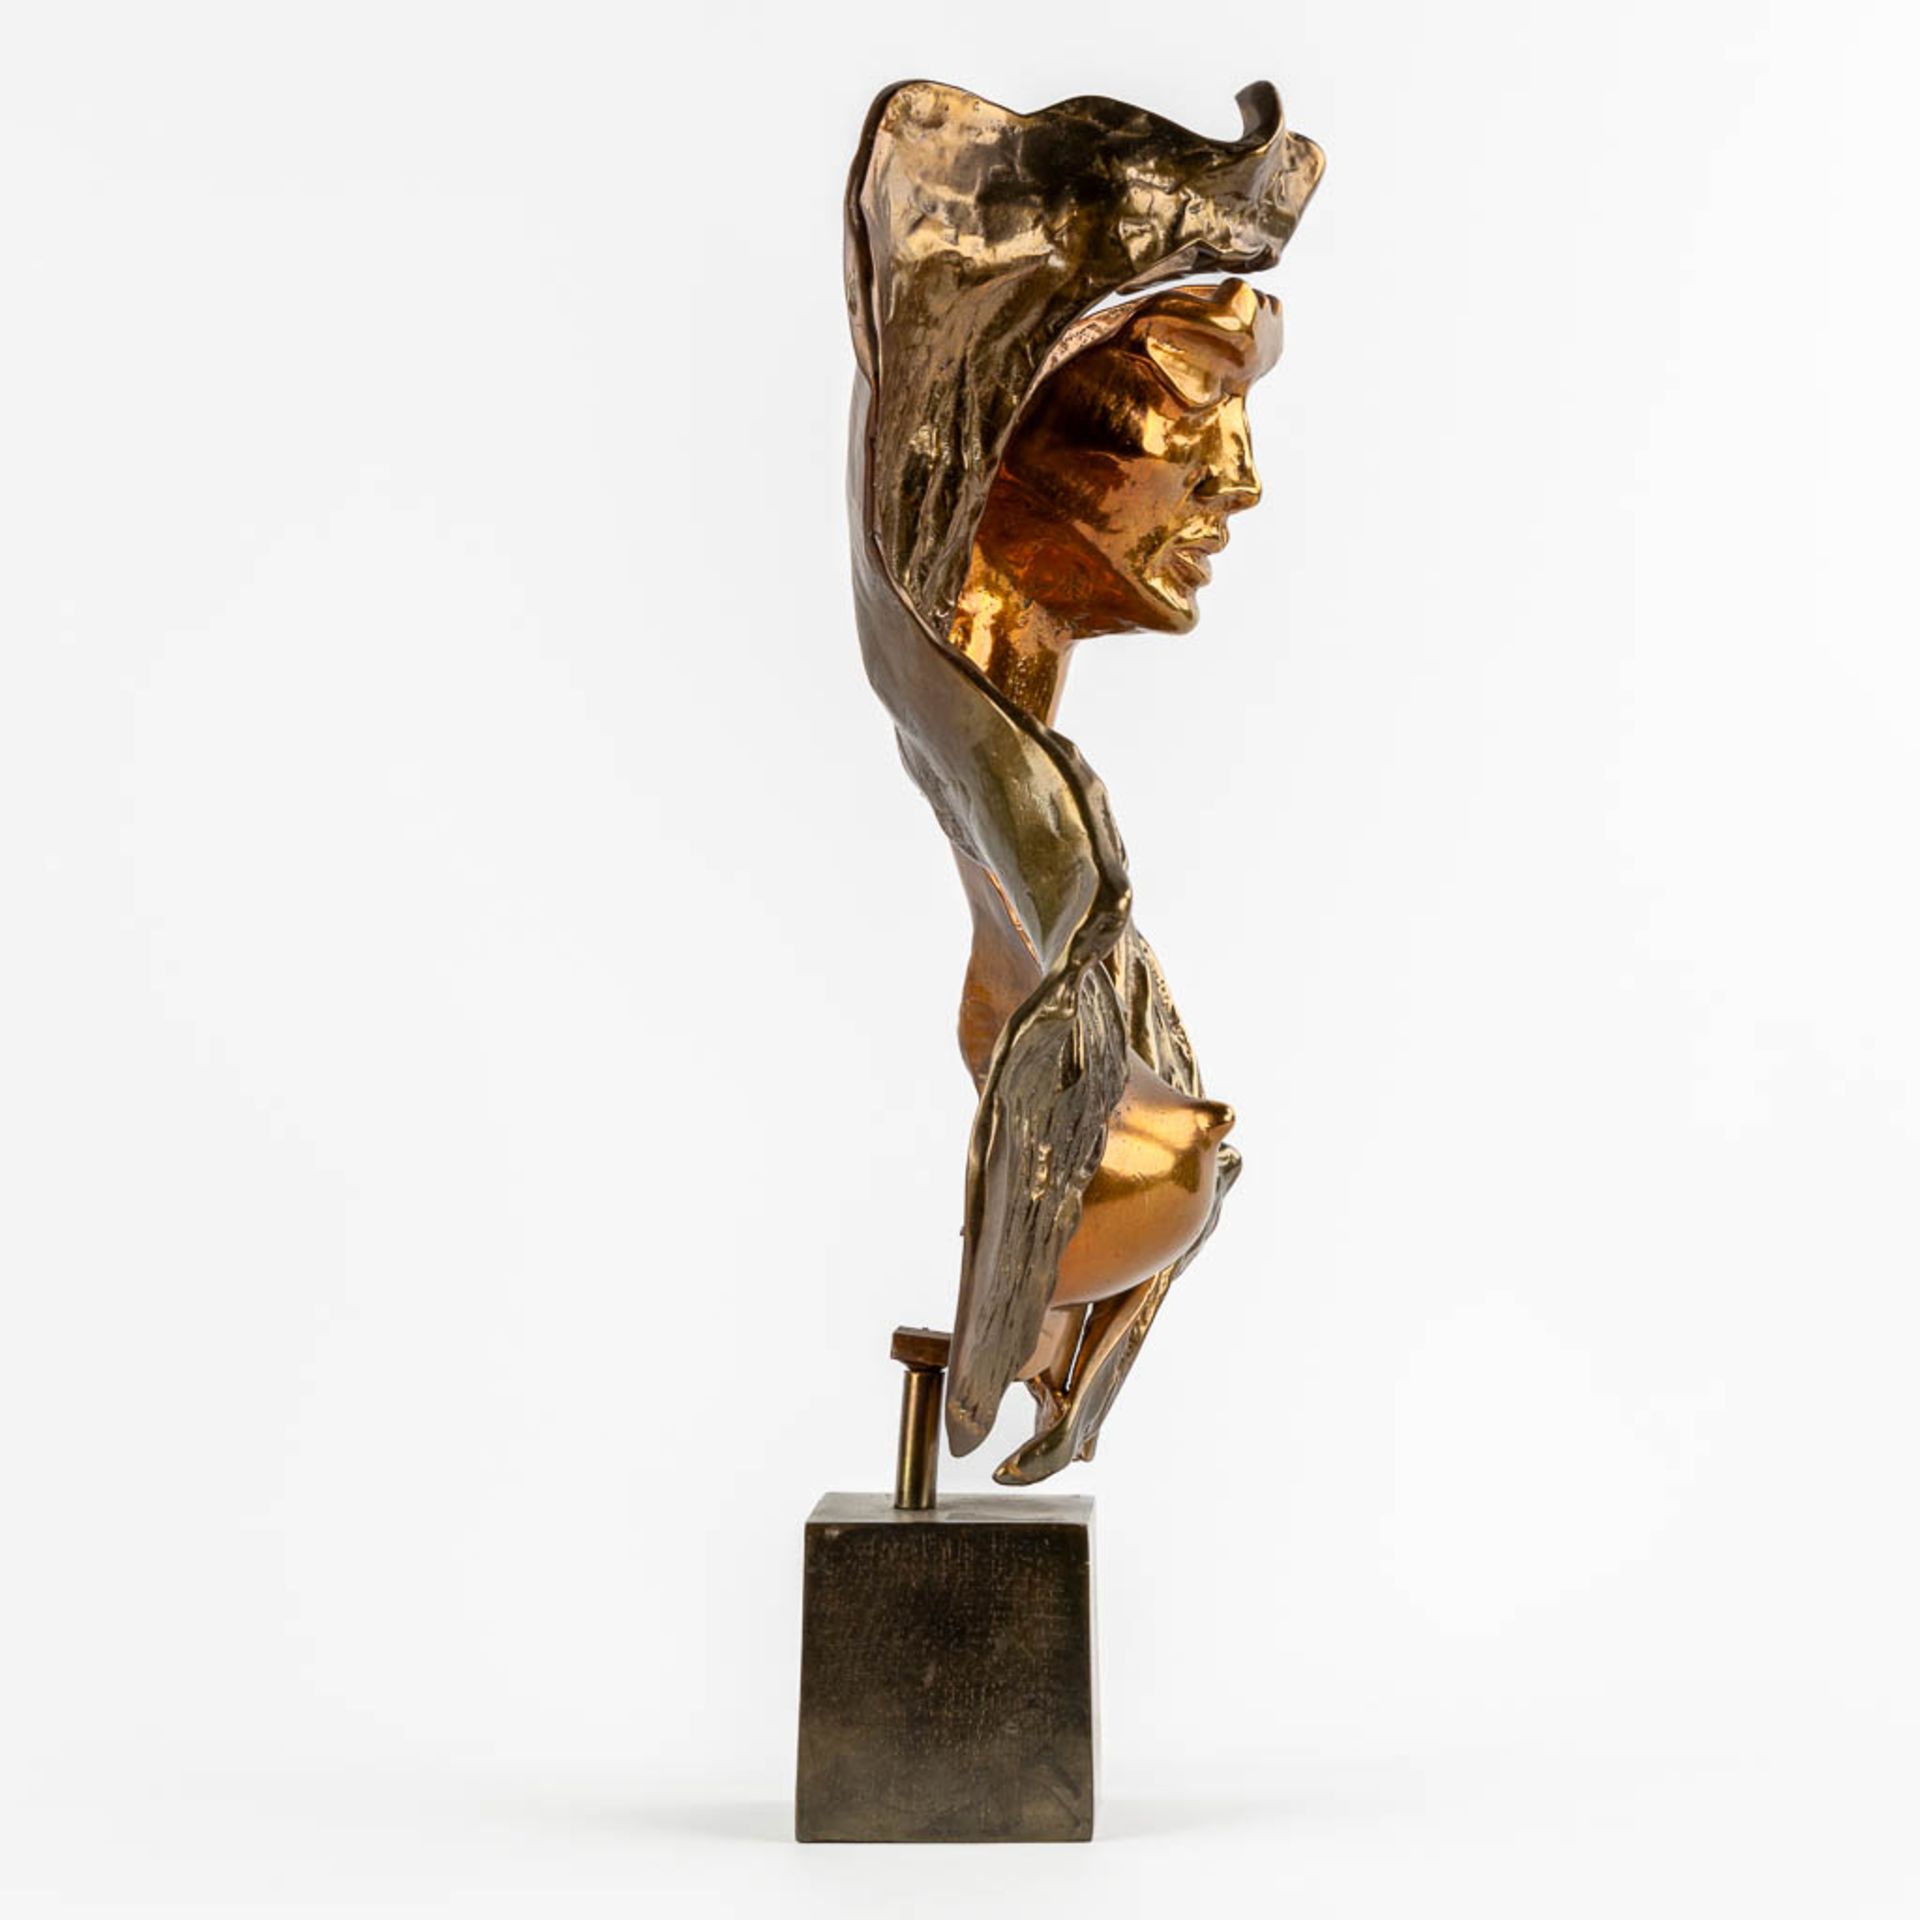 Yves LOHE (1947) 'Figure of a Lady' patinated bronze. (L:13 x W:29 x H:54 cm) - Image 6 of 10